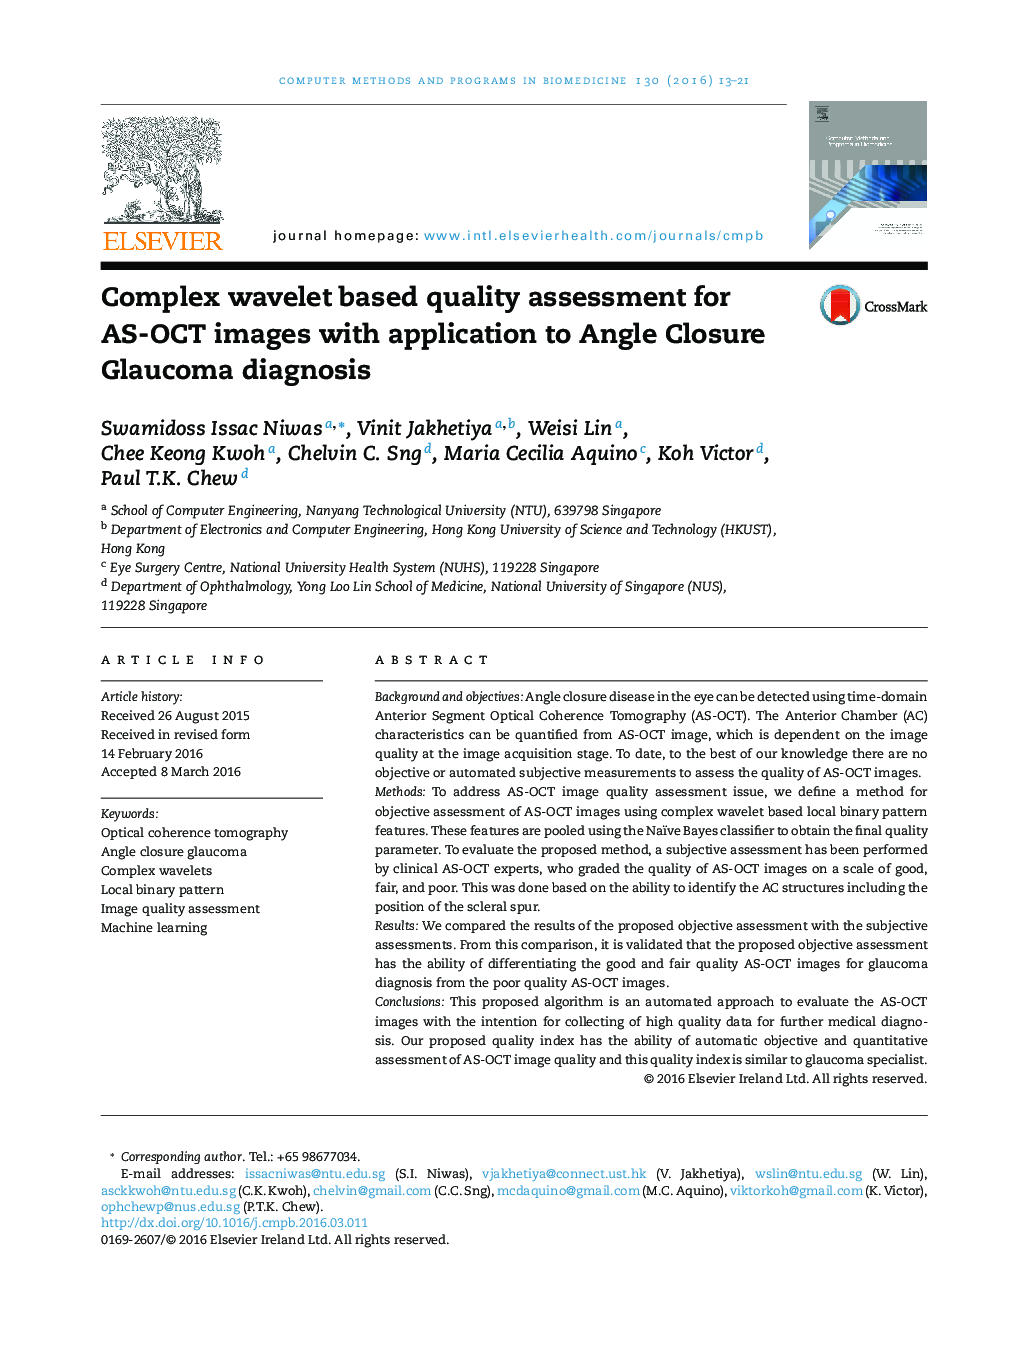 Complex wavelet based quality assessment for AS-OCT images with application to Angle Closure Glaucoma diagnosis